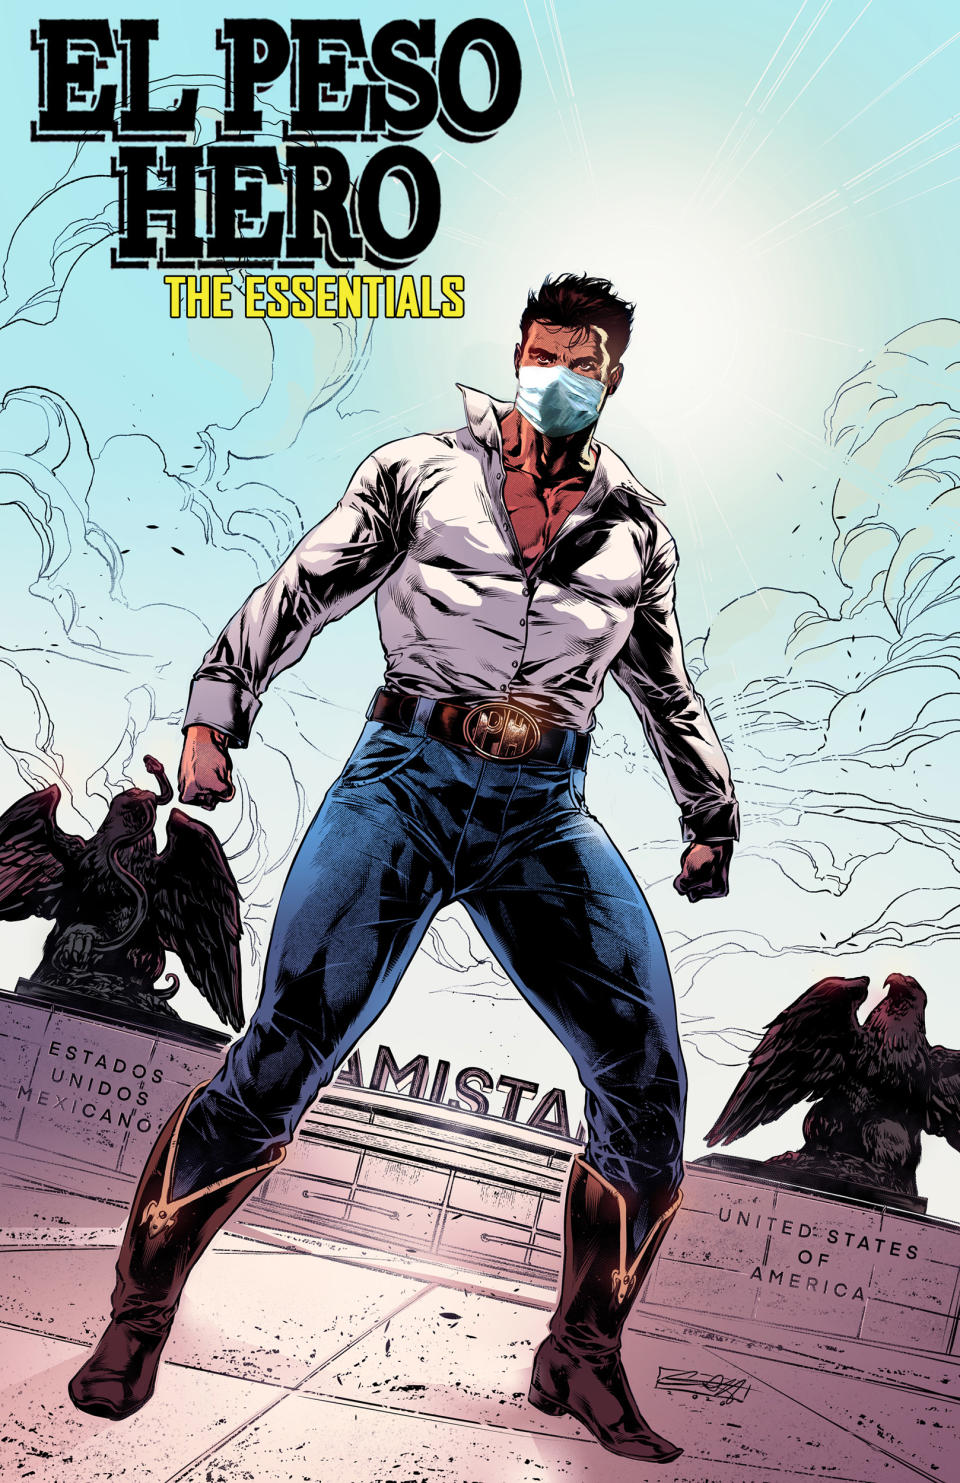 Image: The cover with El Peso Hero and the Amistad Dam in the background. On either side of him are the Mexican and U.S. eagles. (Rio Bravo Comics)